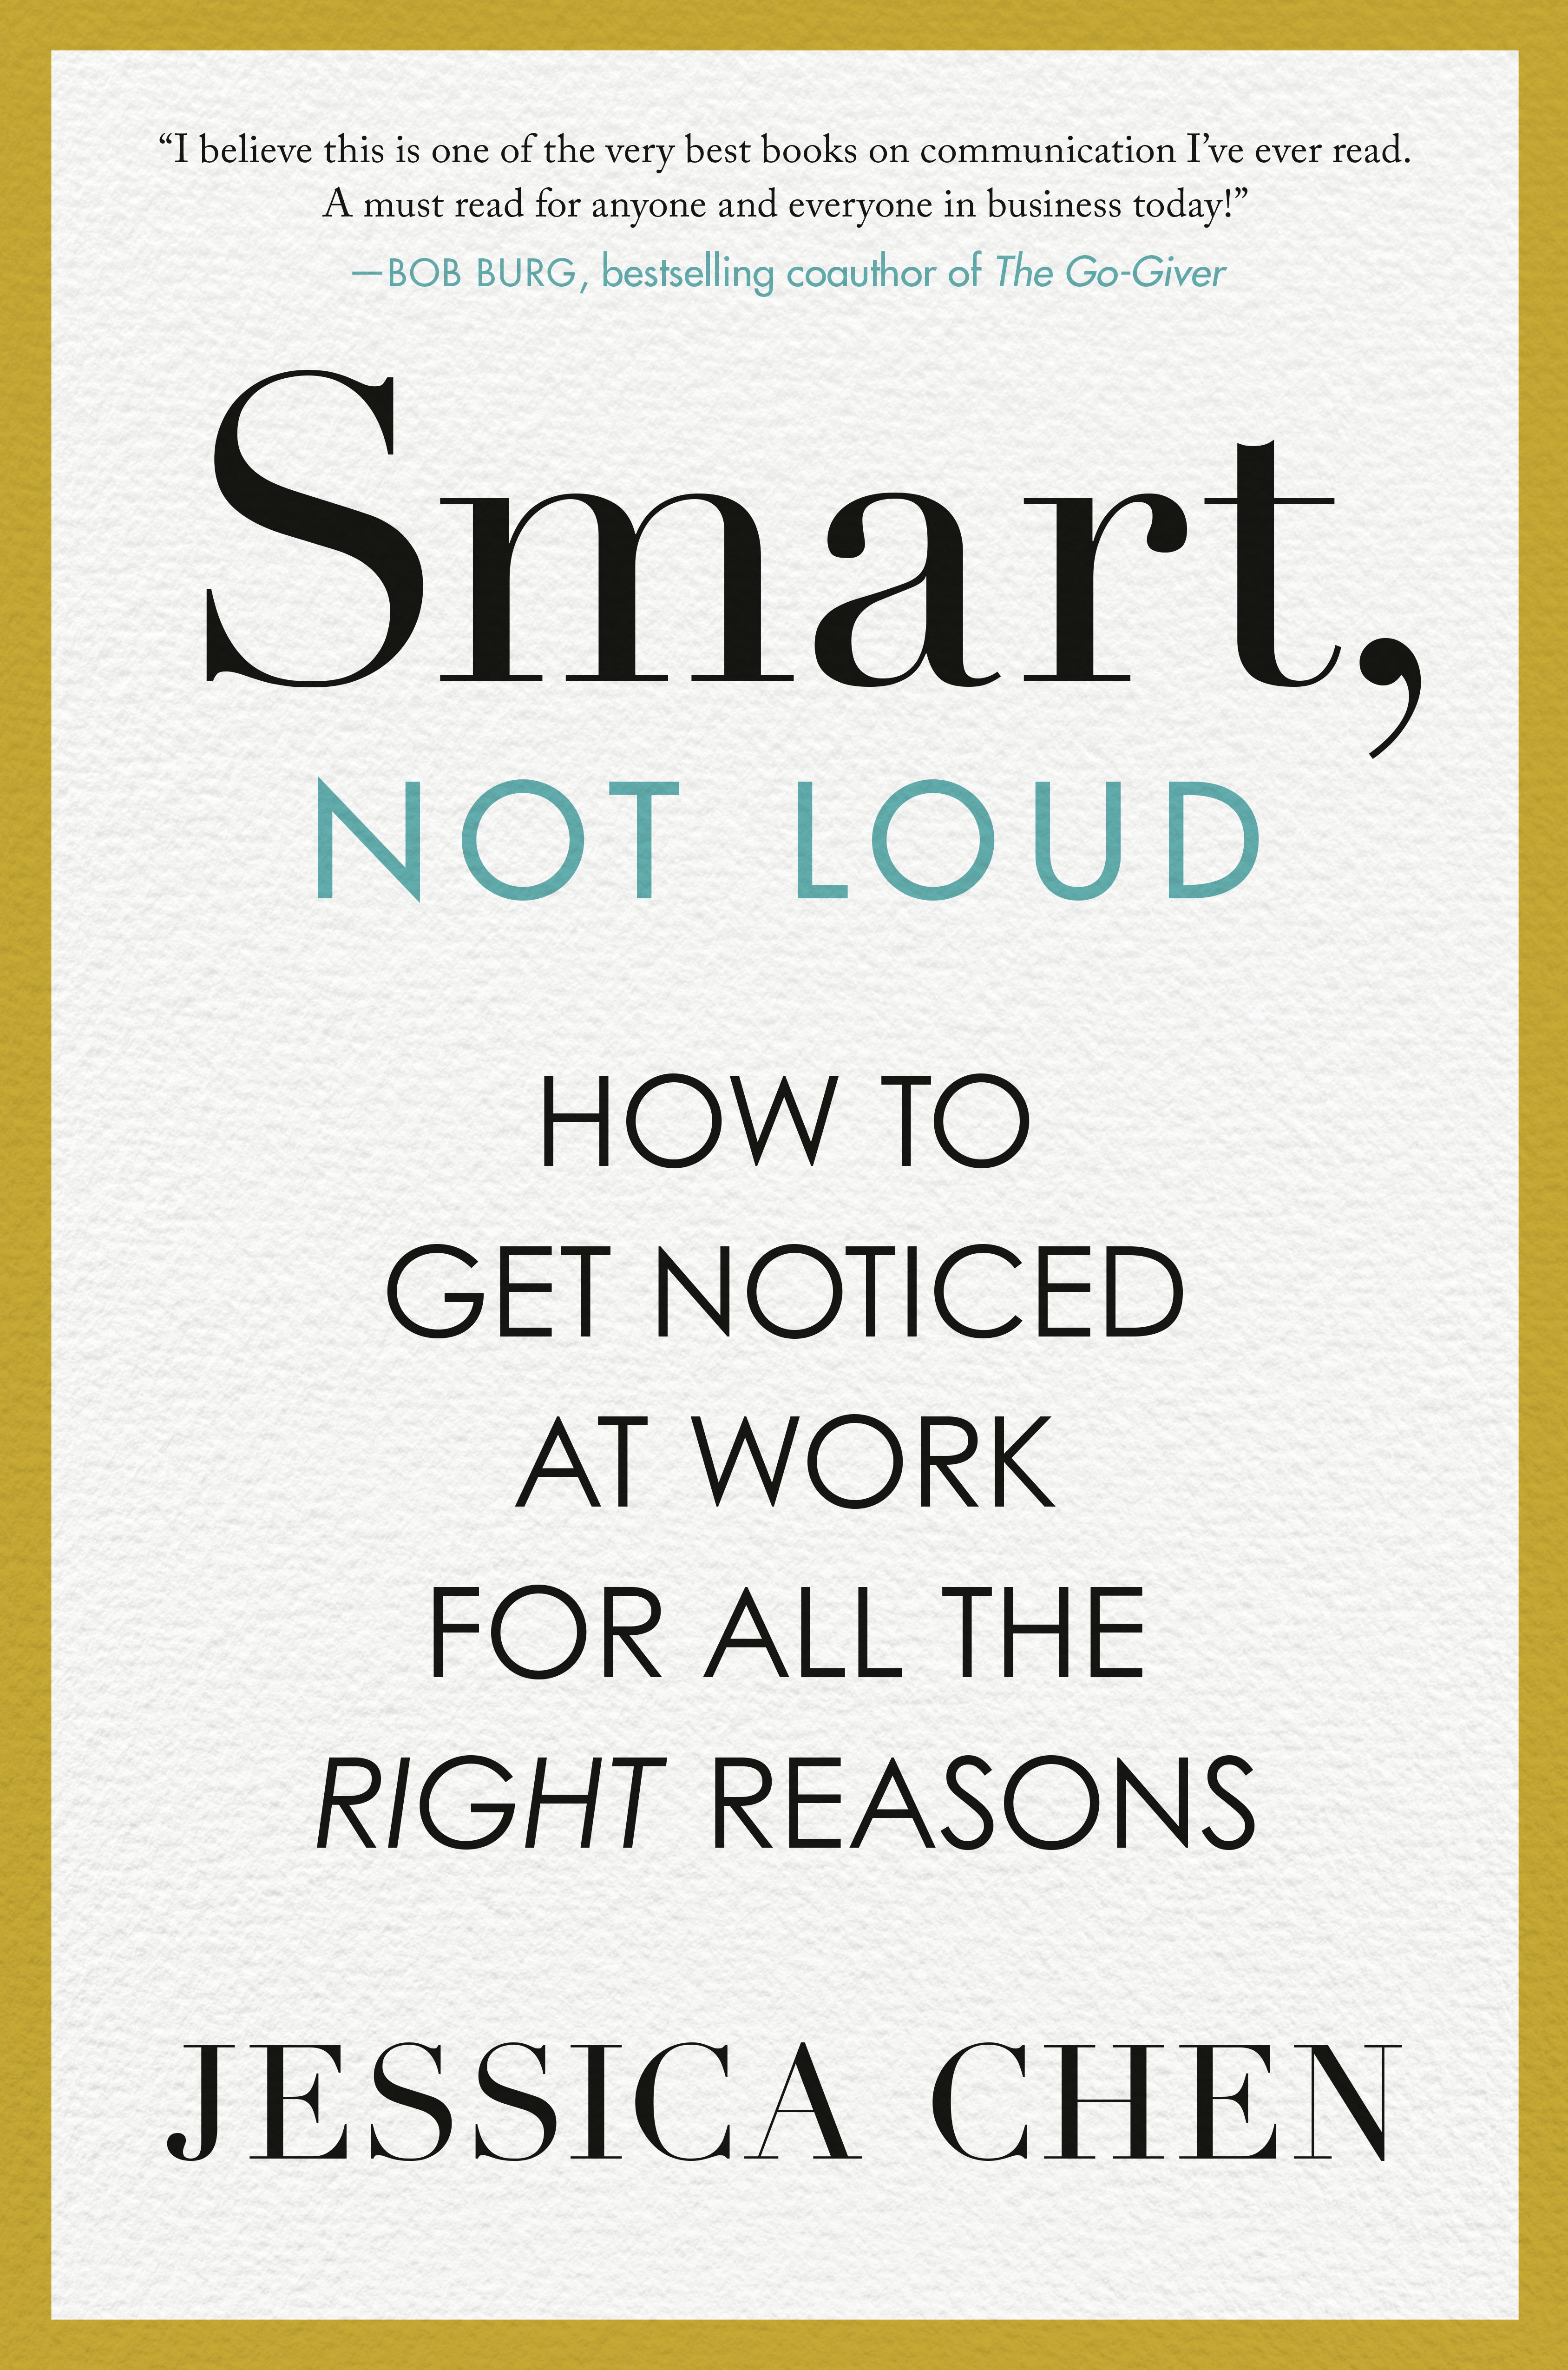 Smart, Not Loud How to Get Noticed at Work for All the Right Reasons